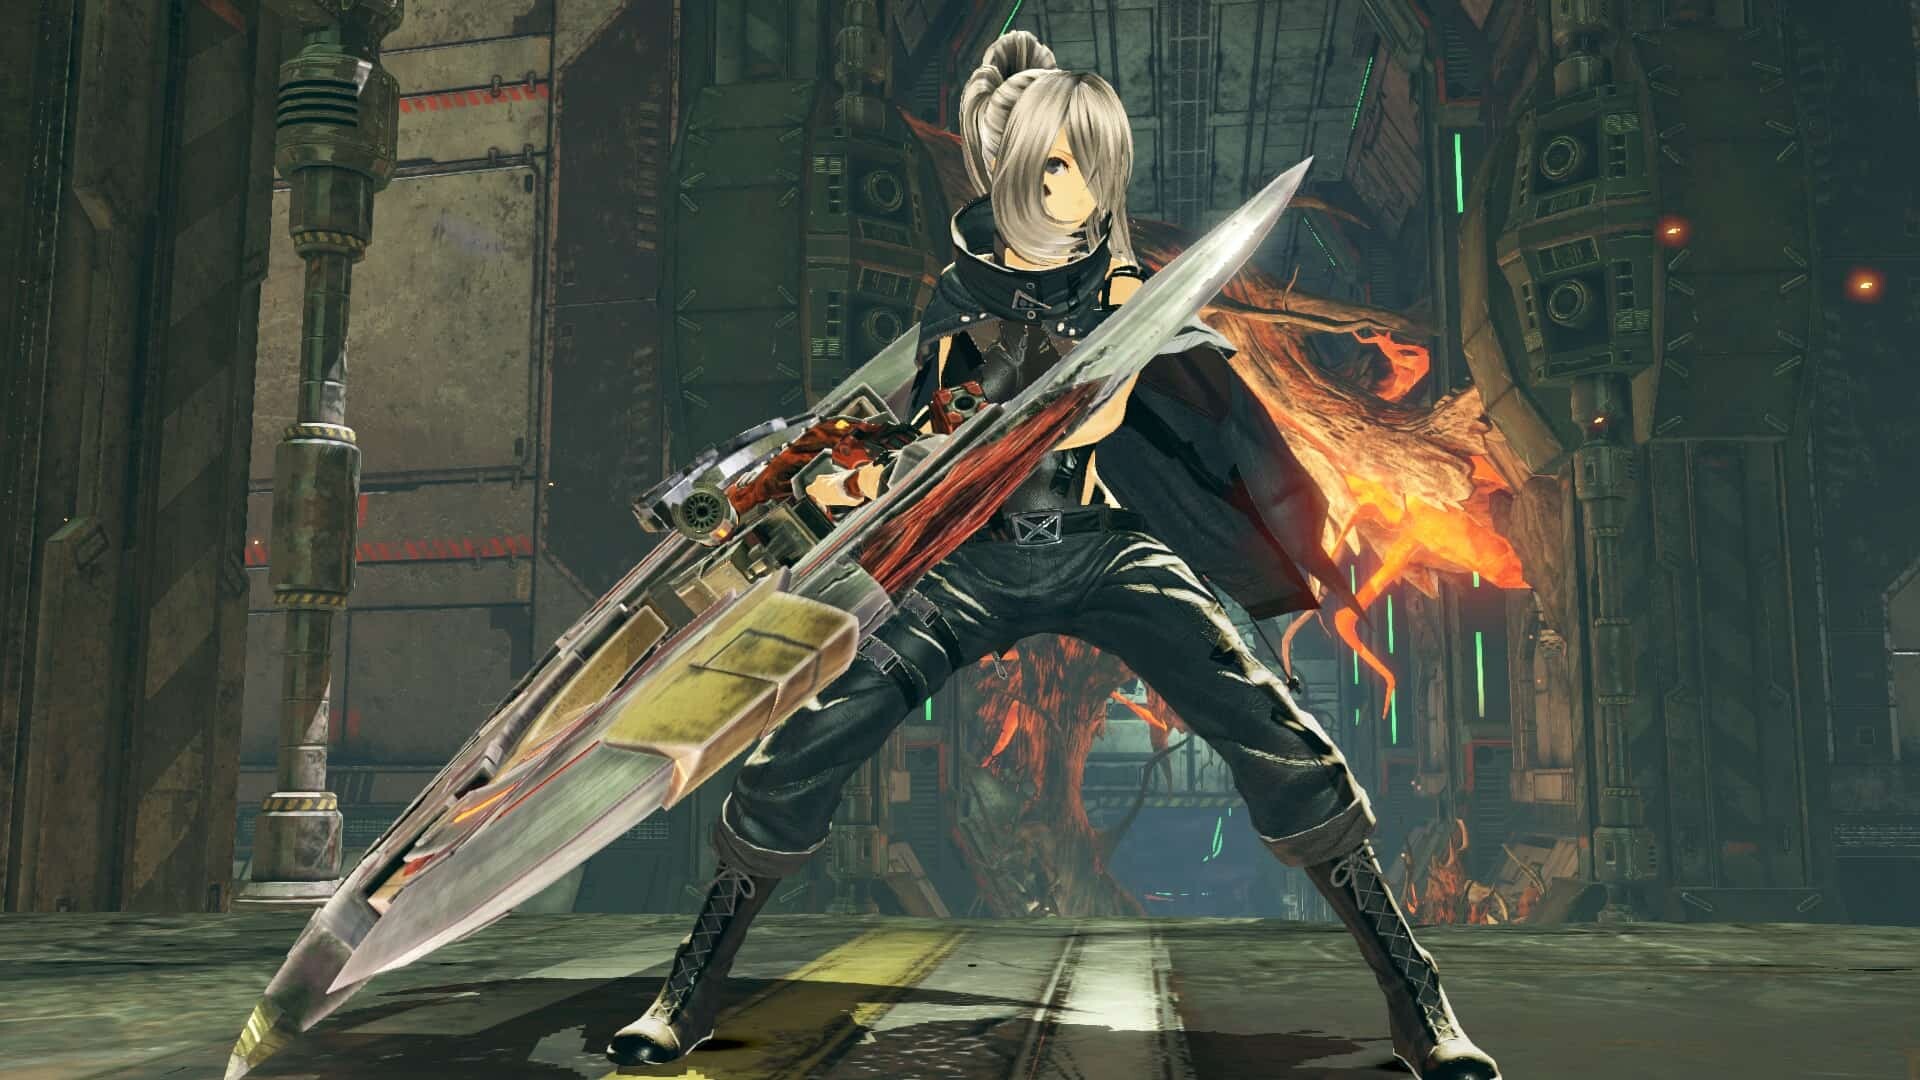 God Eater (Game): A sci-fi action role-playing series developed by Shift and published by Bandai Namco Entertainment. 1920x1080 Full HD Background.